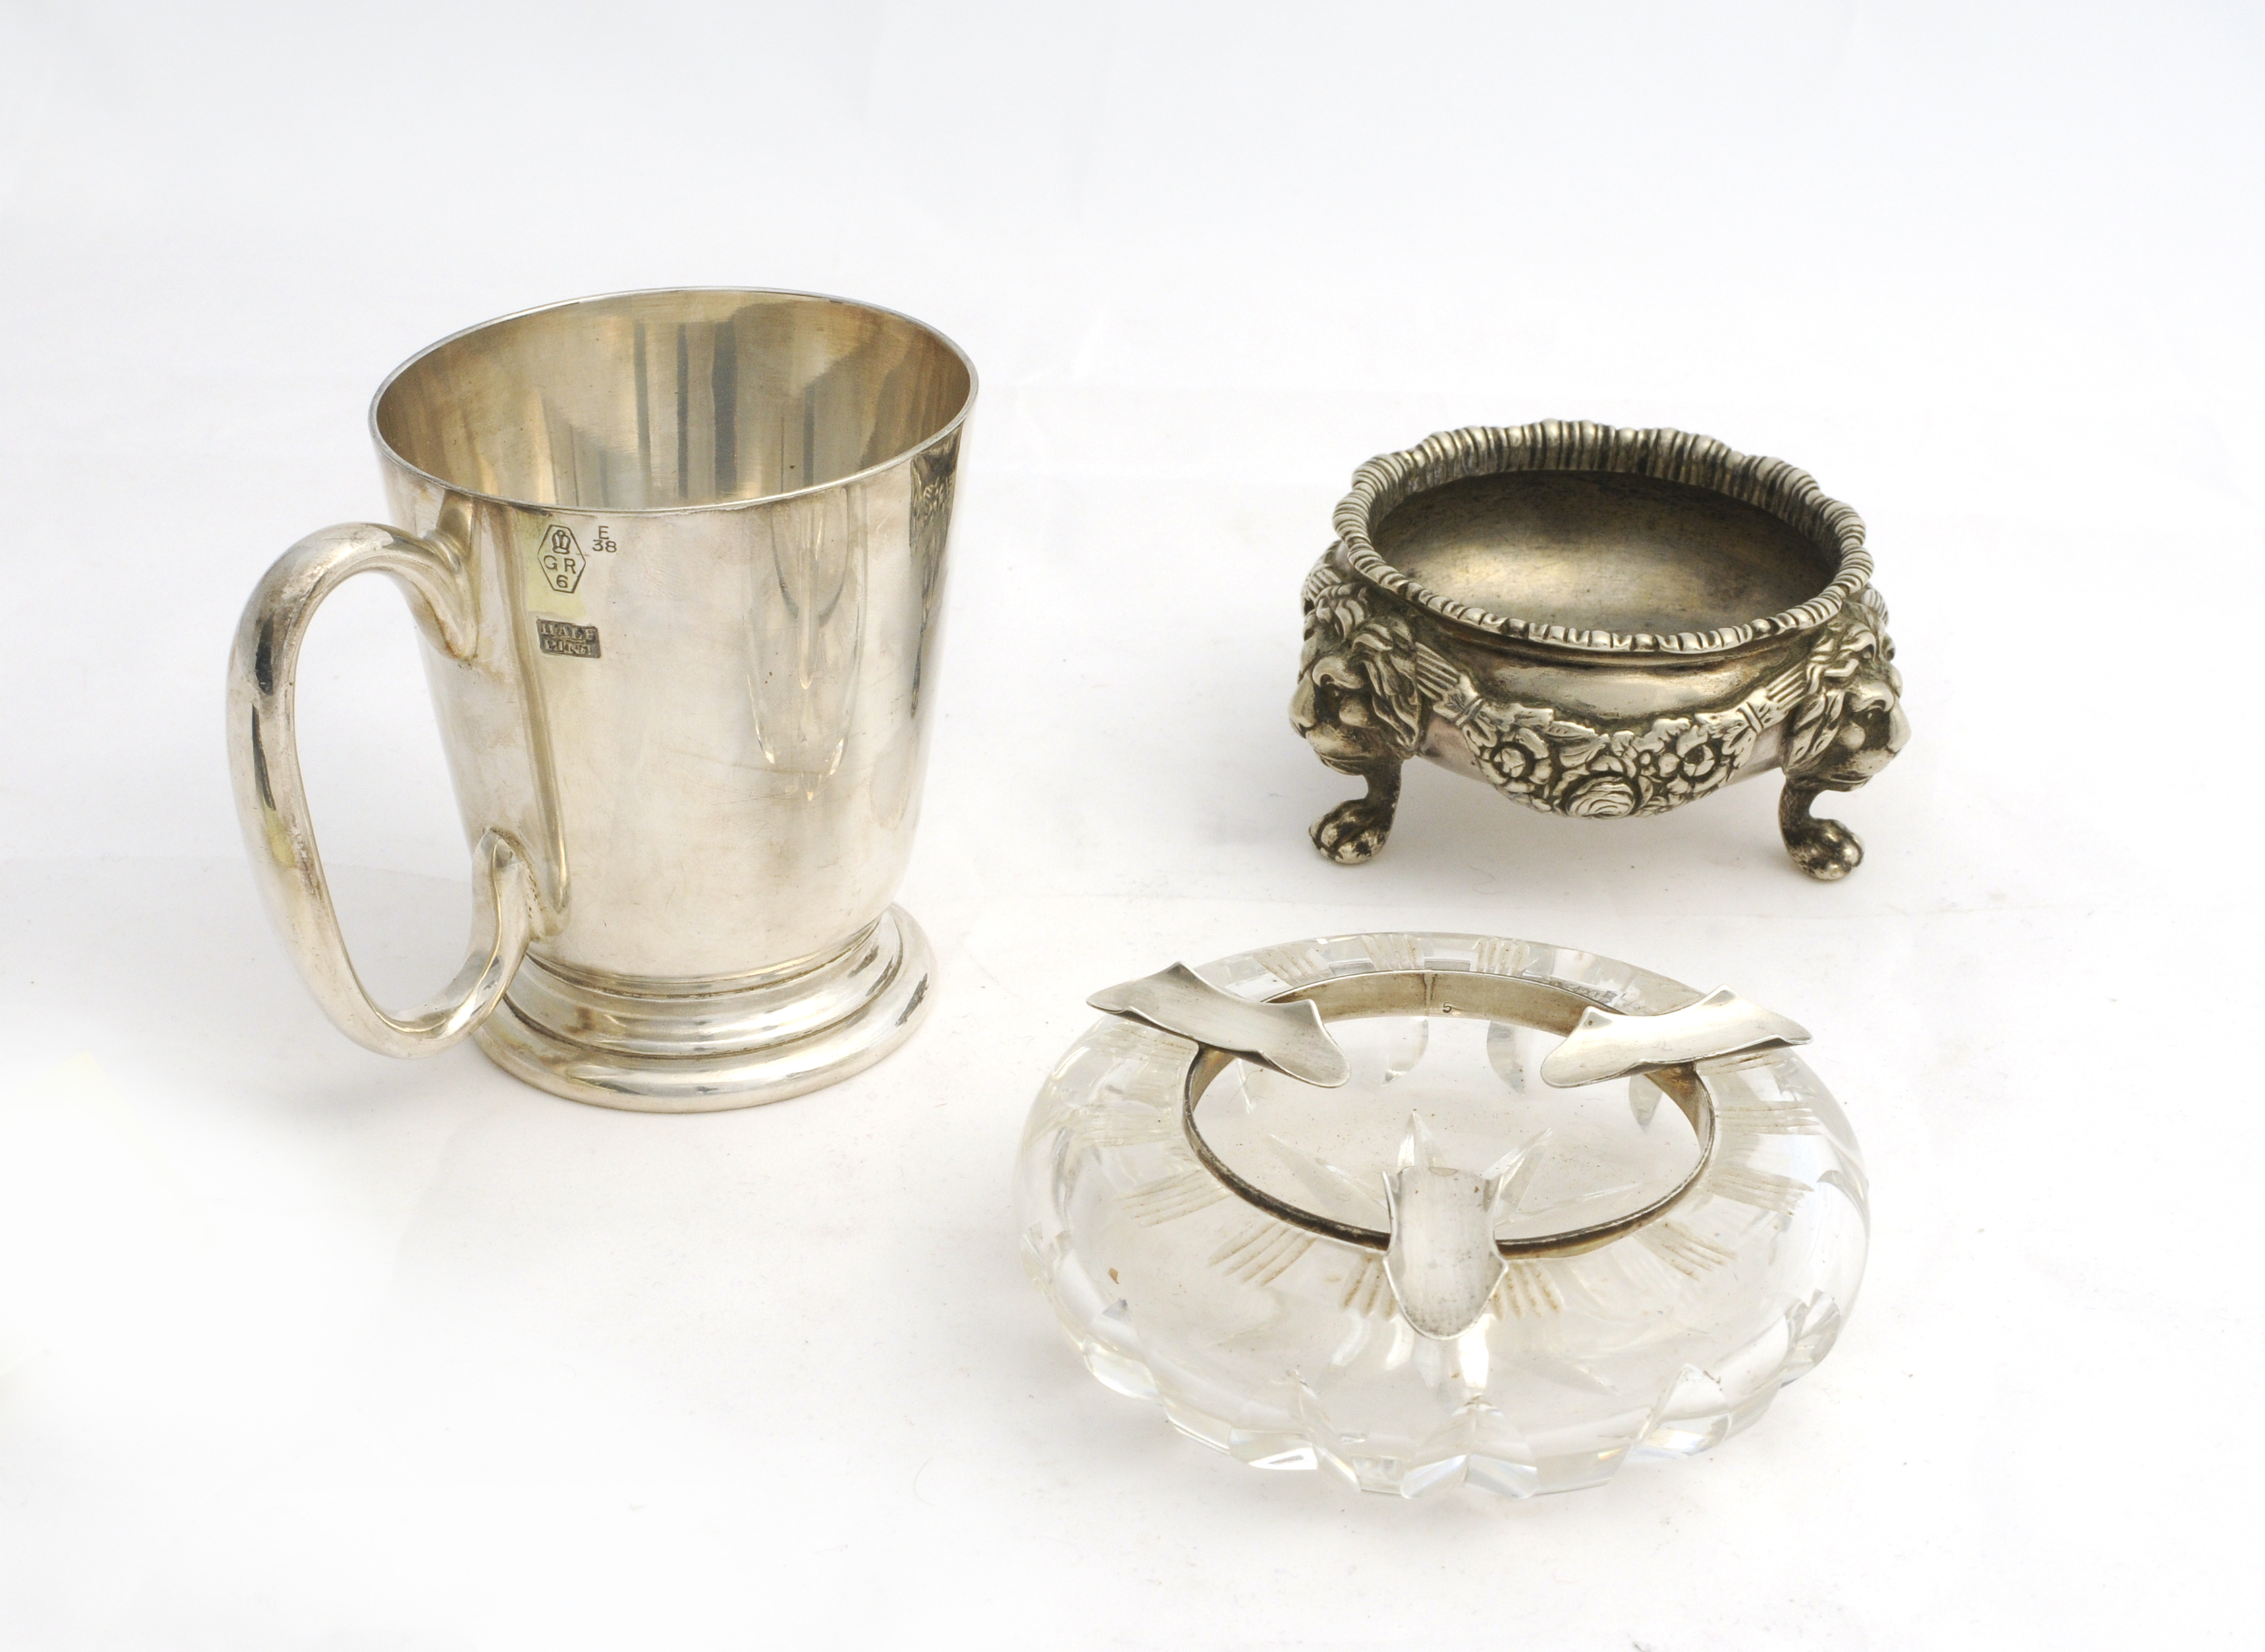 An Ashtray, Silver Plated Tankard and a